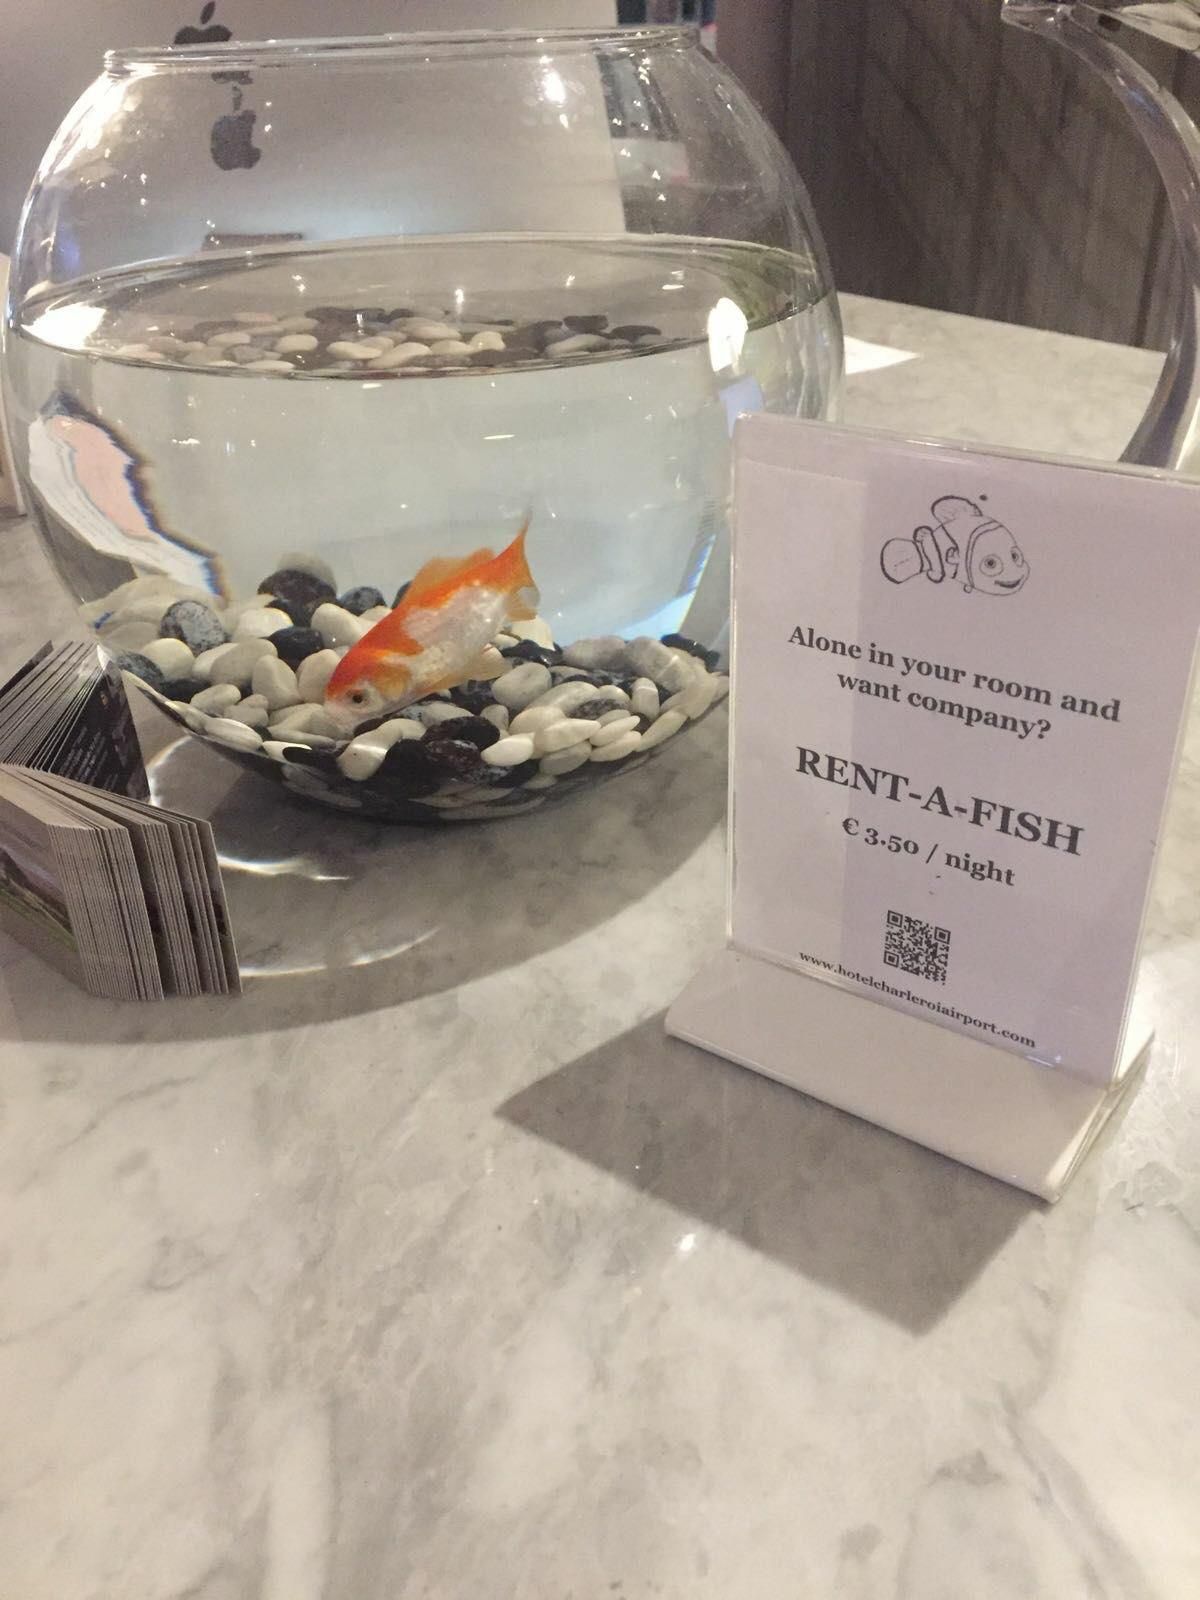 Alone at your hotel? Rent A Fish €3.50 per night